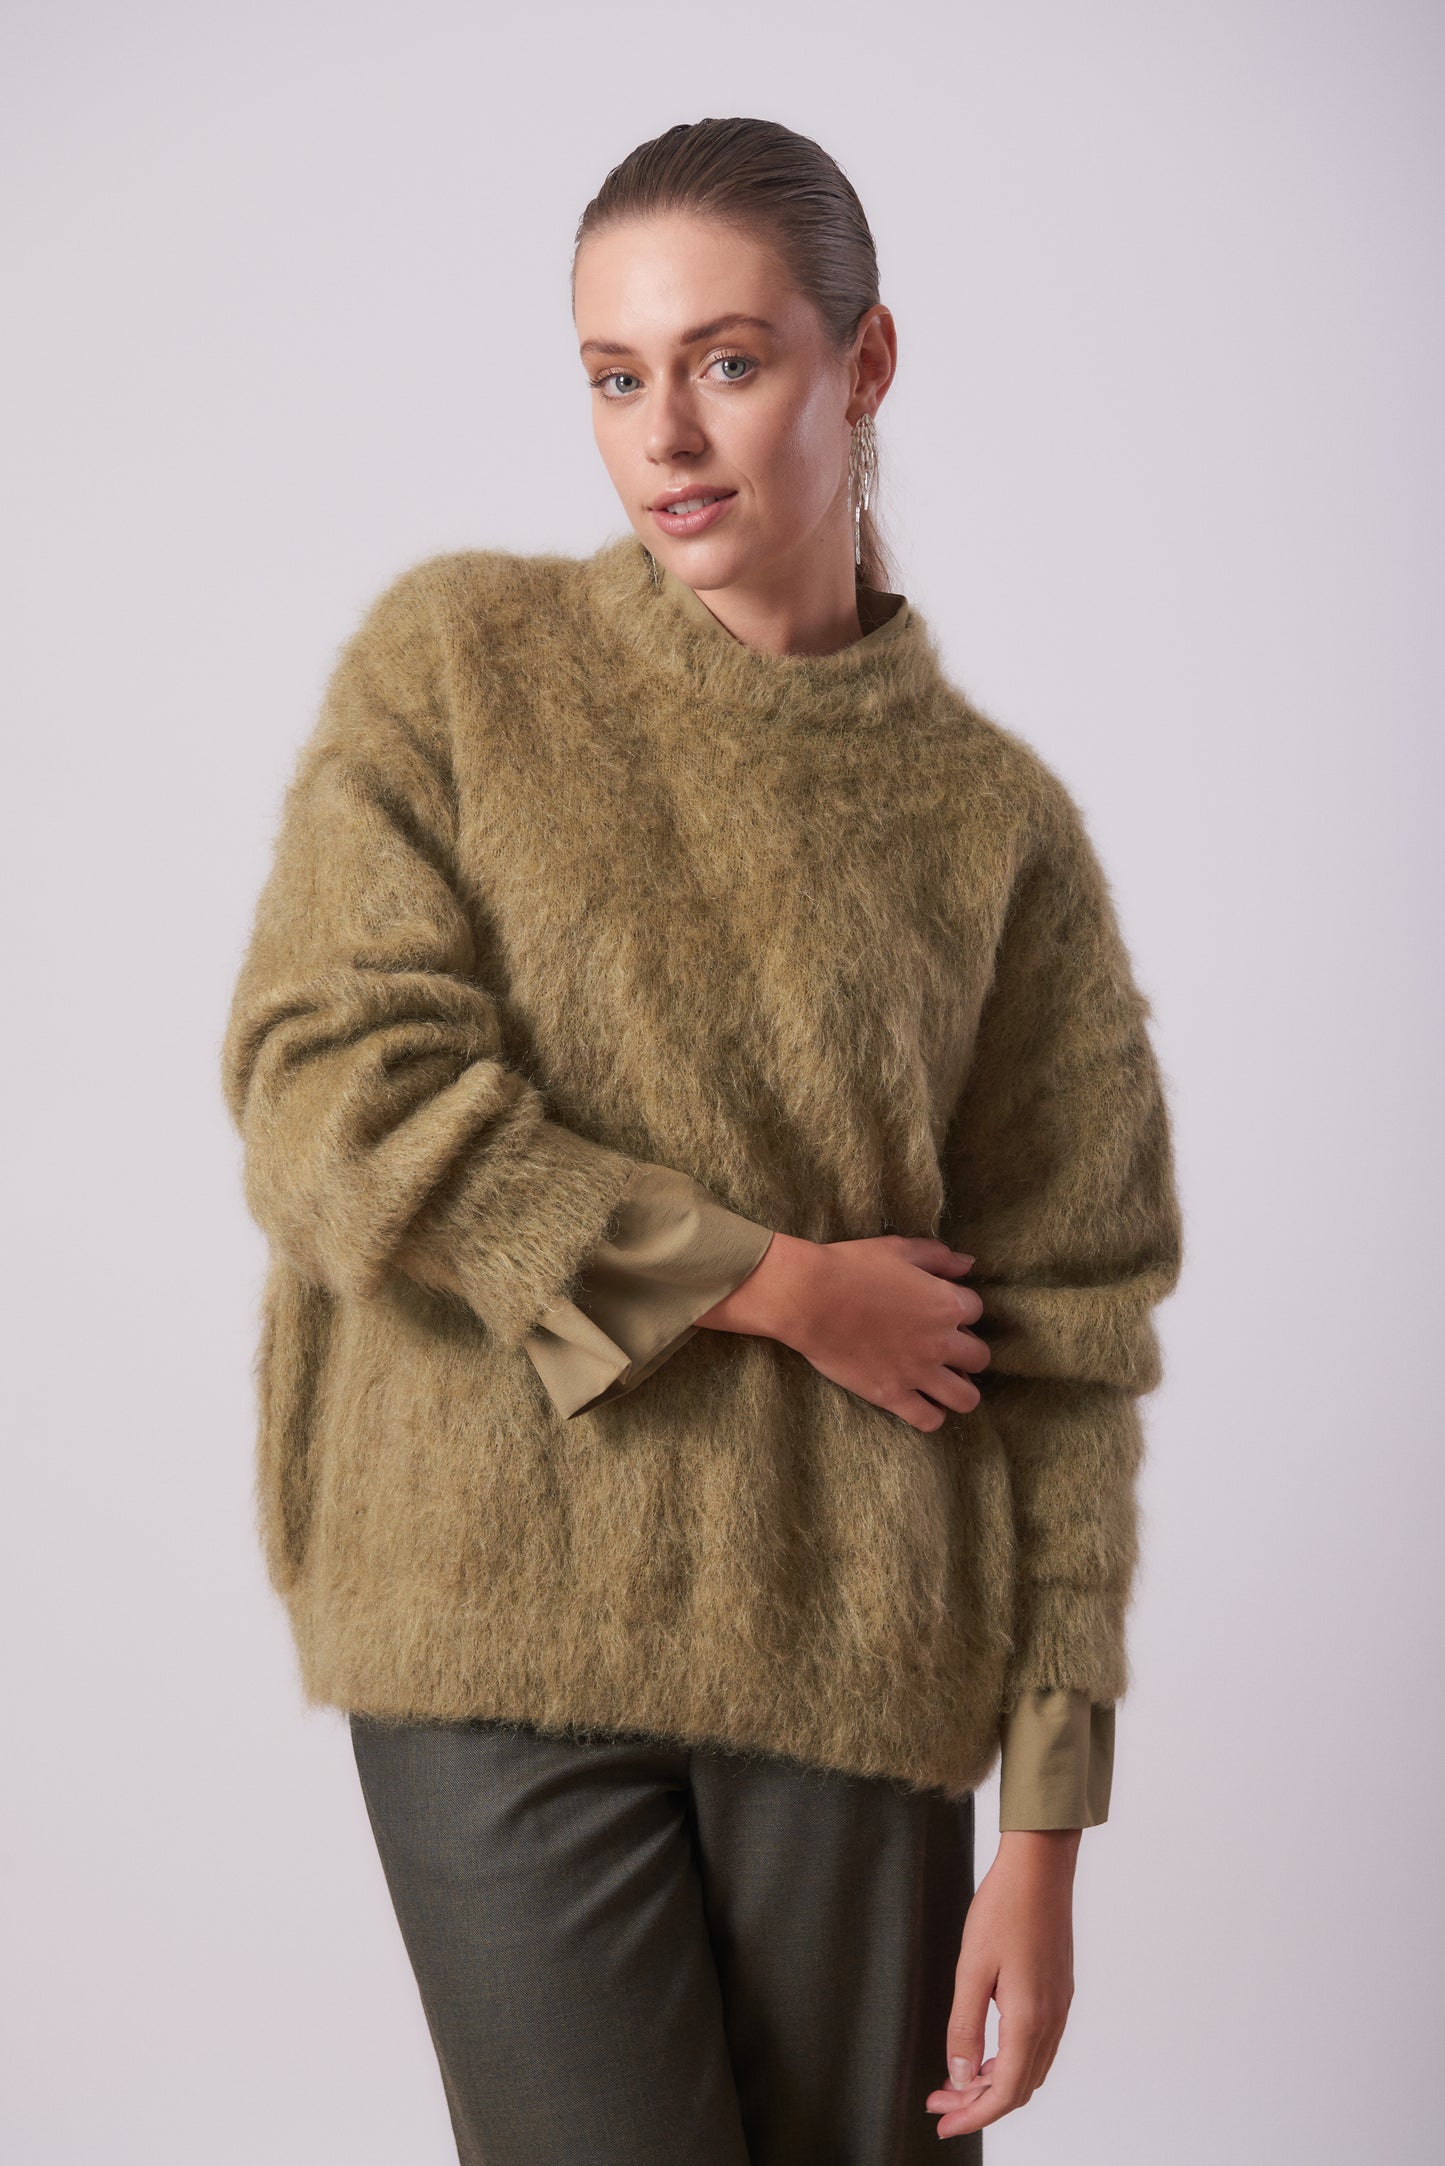 Pullover 1 Mohair Sweater | Light Olive